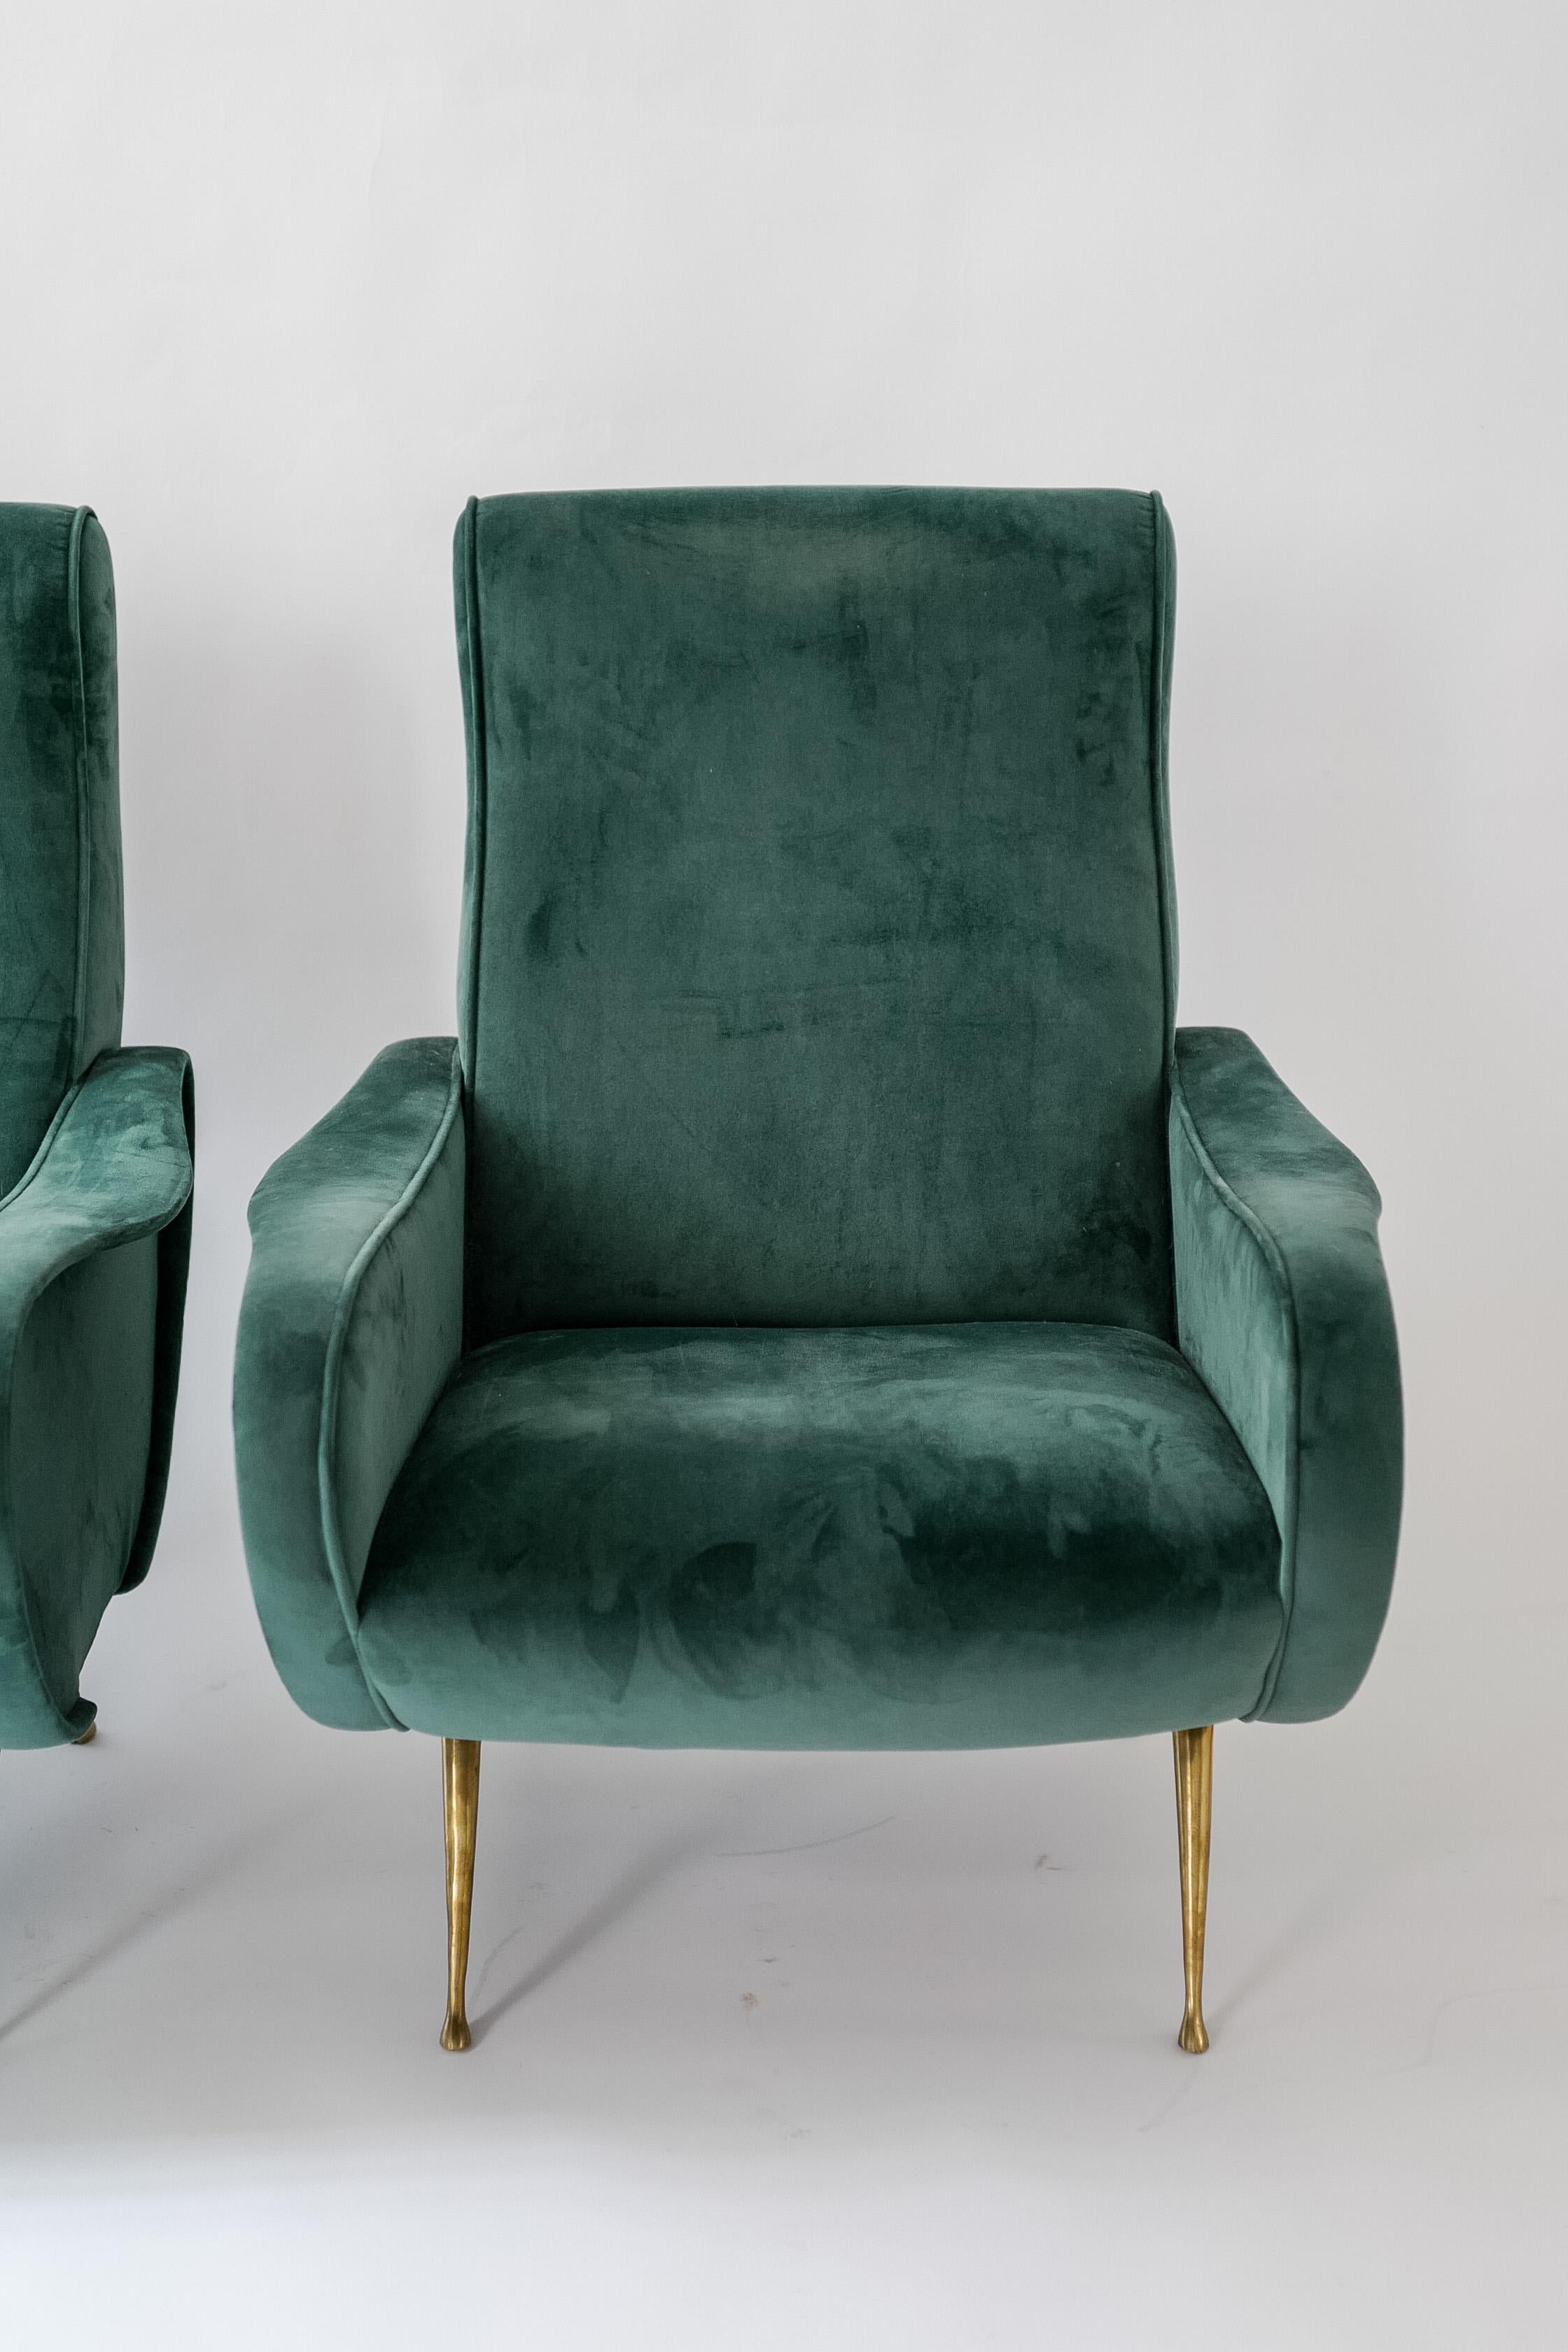 A pair of iconic Marco Zanuso lady chairs, Italy. Features brass feeting and newly upholstered in a rich green velvet. This shape is extremely comfortable and visually appealing.